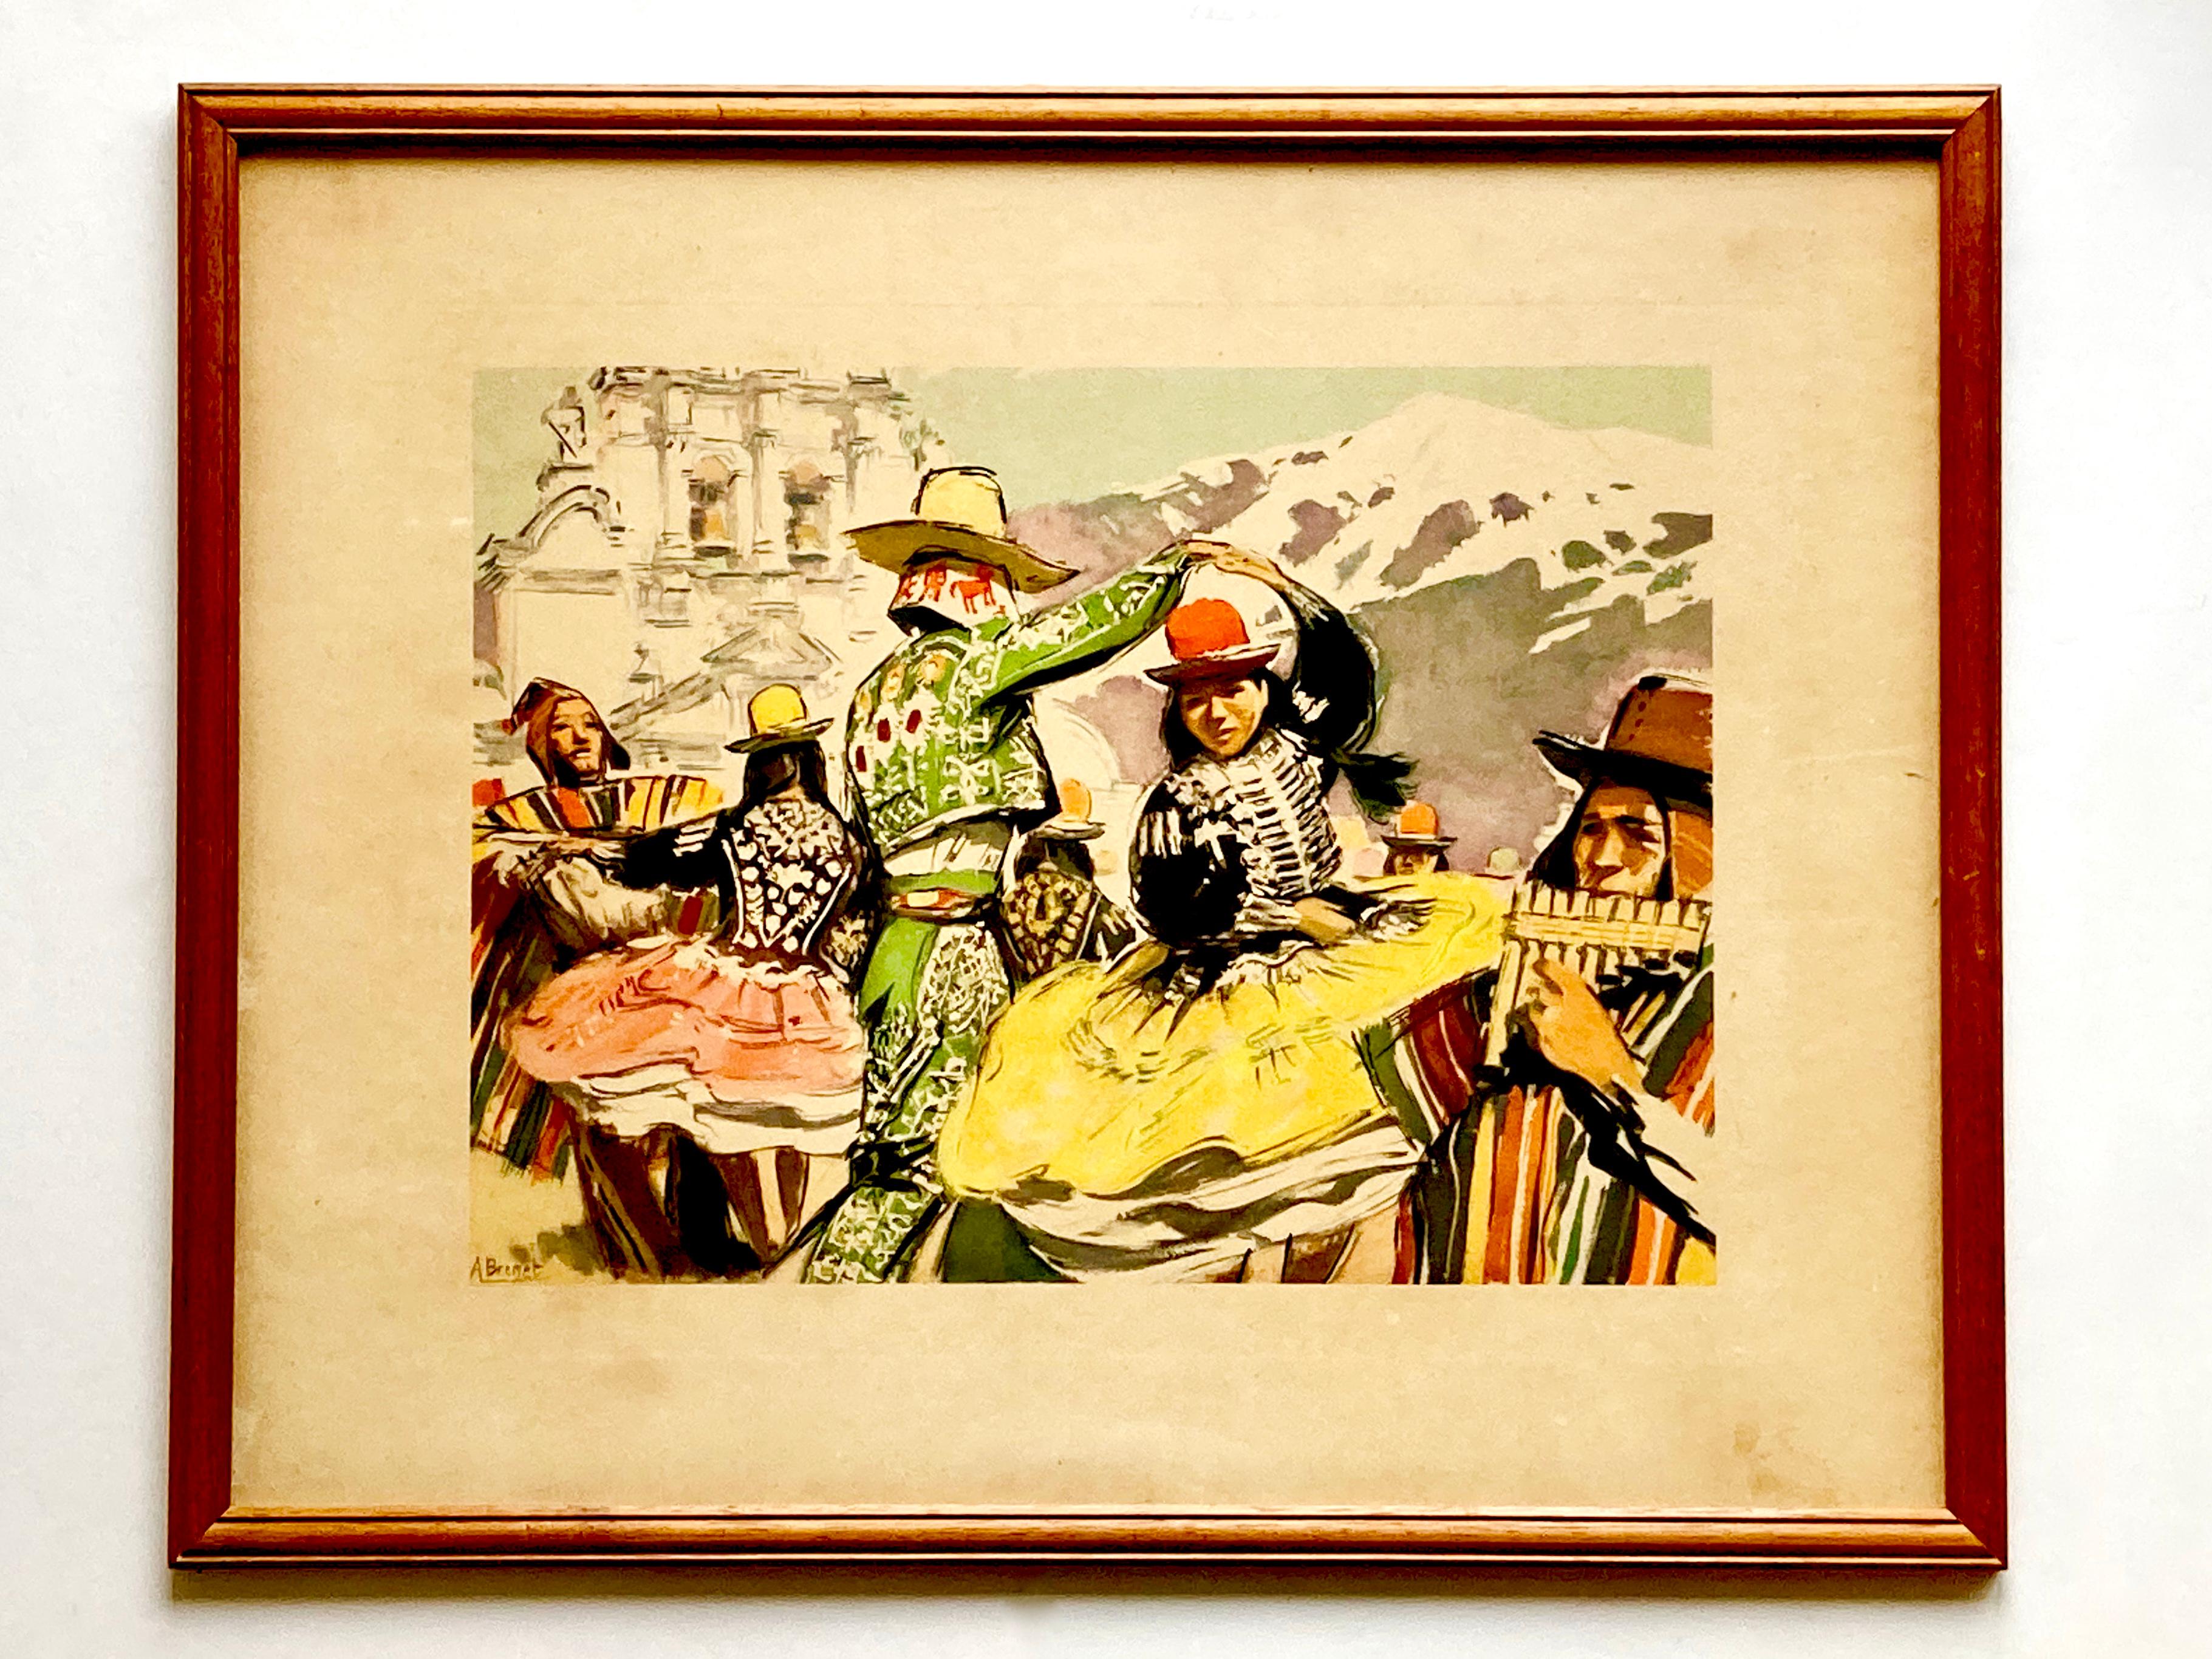 Two authentic, framed, 1950s full-colored prints after originals by French artist Albert Brenet (1903-2005). One depicting a colorful scene from Thailand and the other from Bolivia.

Victor Albert Eugène Brenet was born in 1903 in Harfleur, France.